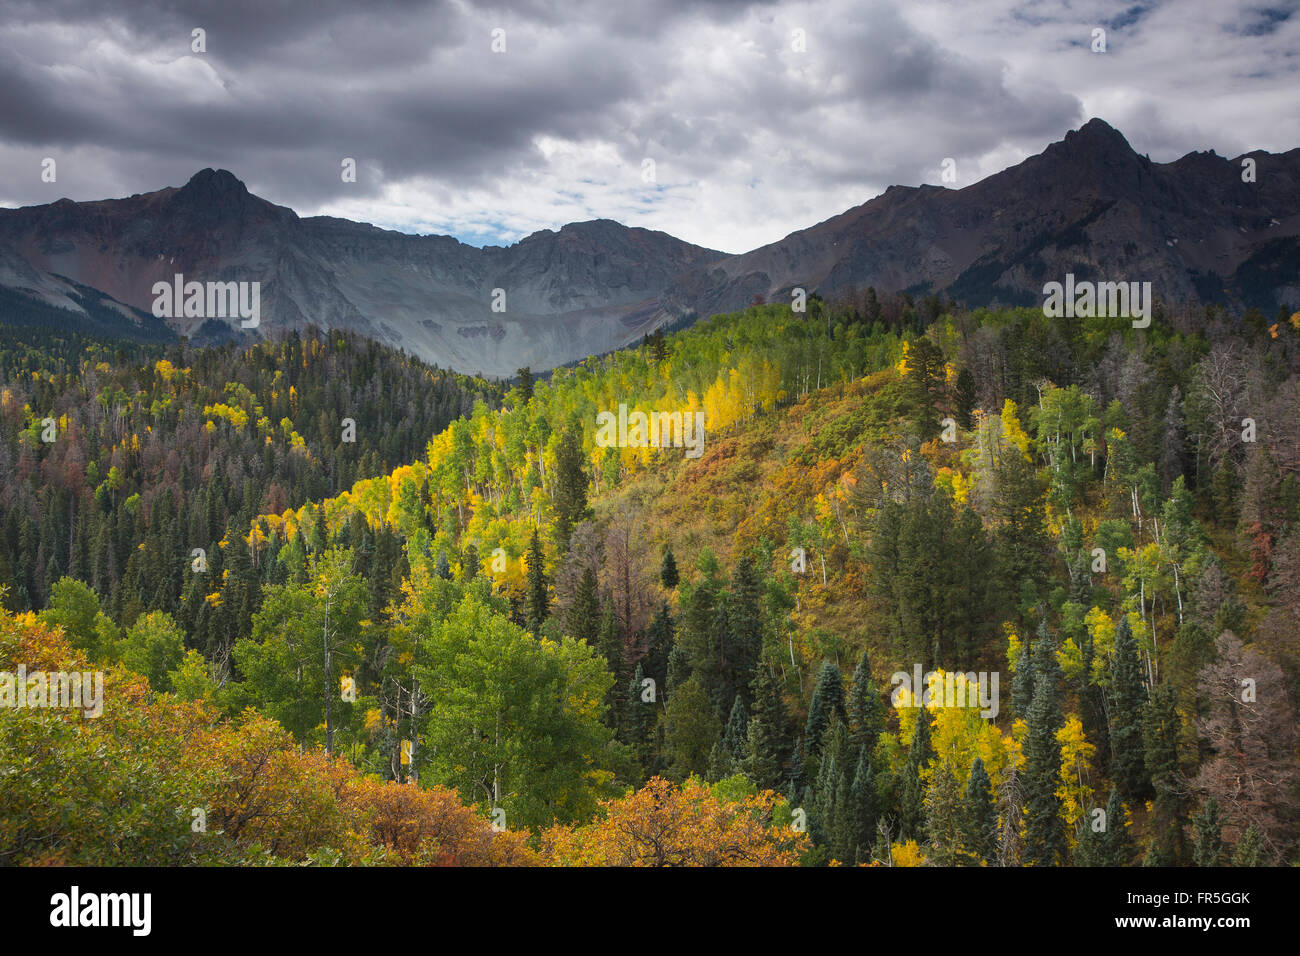 Green and yellow autumn trees on mountain hillside, West Fork Dallas Creek, Colorado, United States Stock Photo